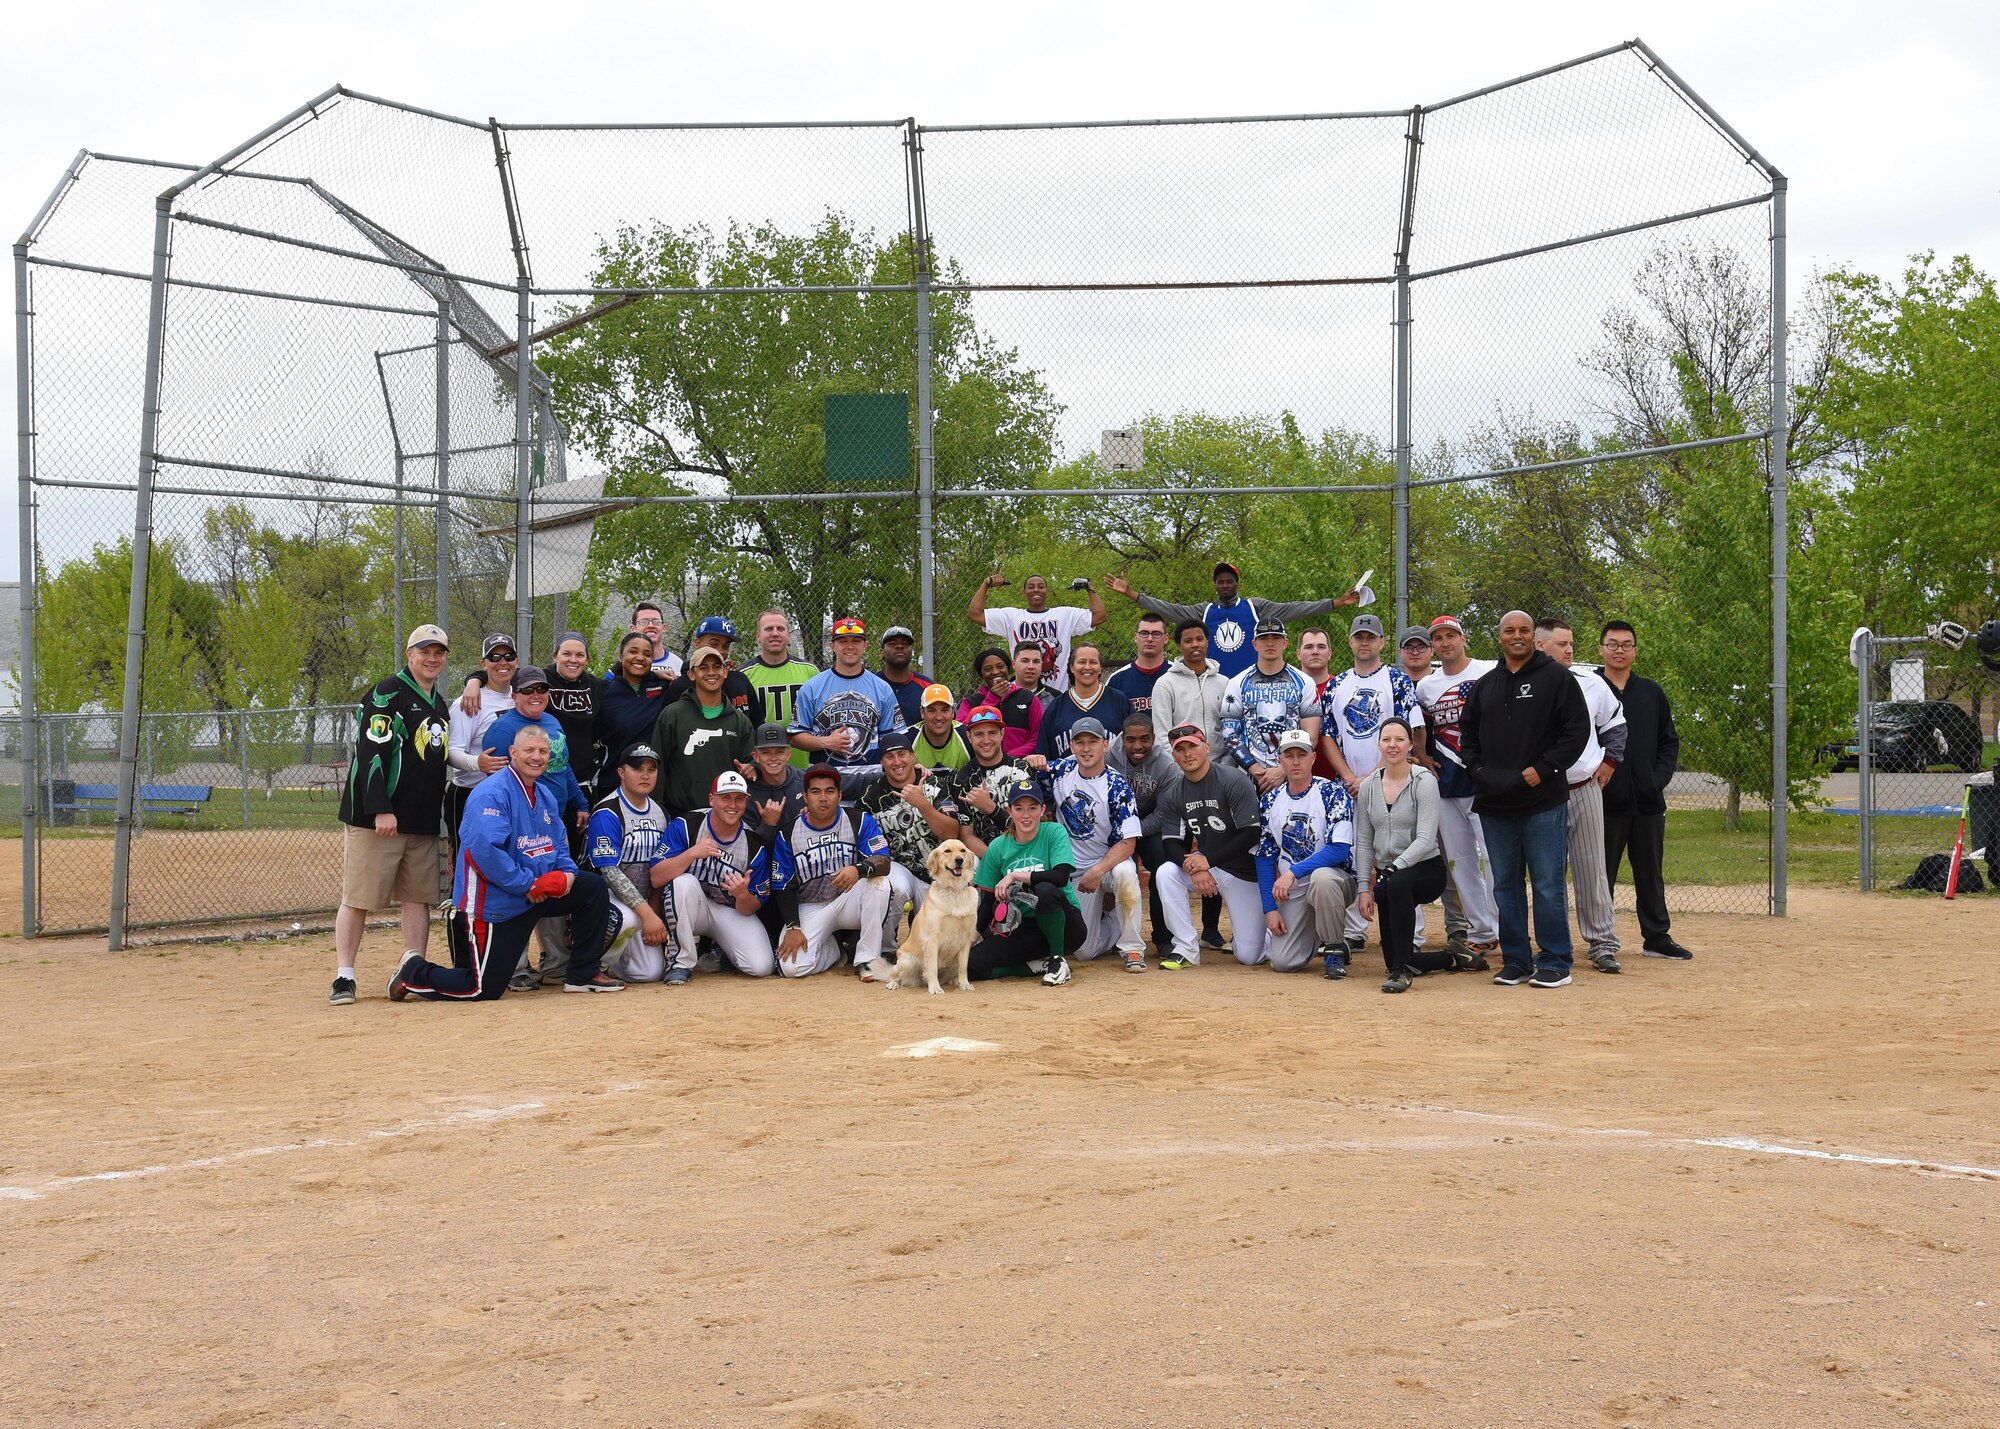 Players from both installations who participated in the Grand Forks AFB versus Minot AFB annual softball tournament May 25, 2017, at Devil’s Lake, N.D. gathered together after the final game to take a group picture. Minot took the trophy home, breaking Grand Forks’ two-year winning streak. (U.S. Air Force photo by Airman 1st Class Elora McCutcheon)